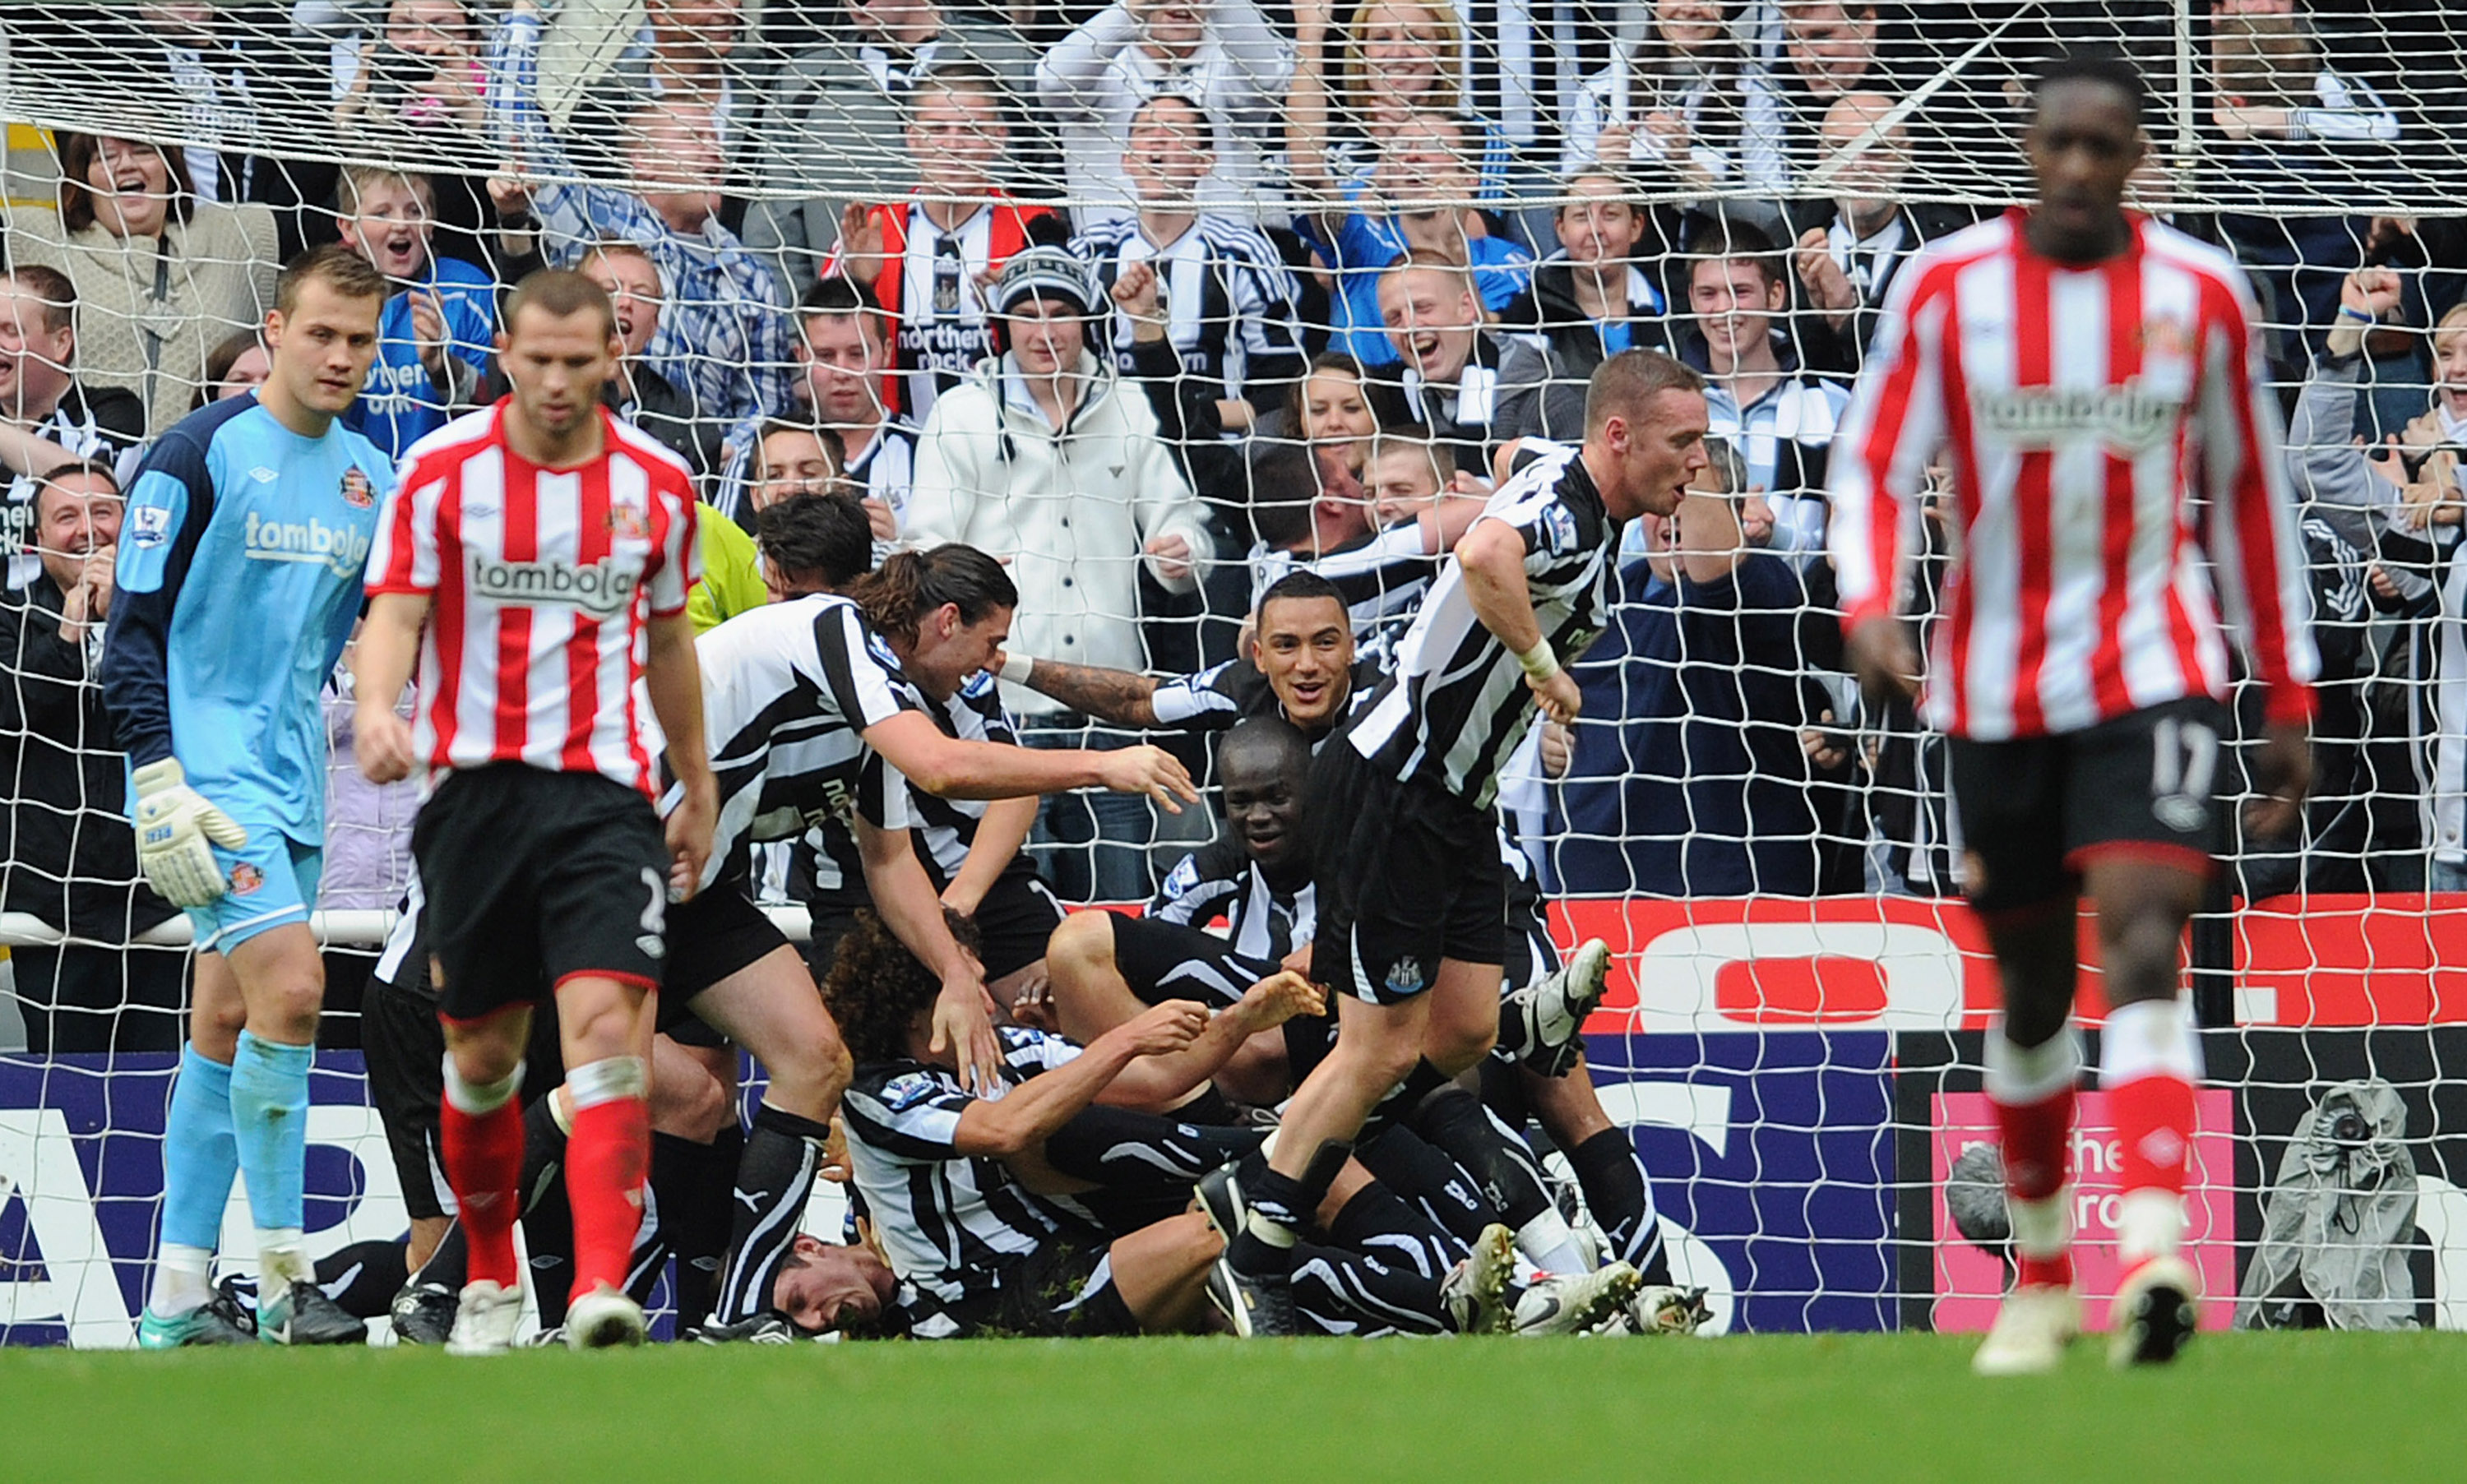 NEWCASTLE UPON TYNE, ENGLAND - OCTOBER 31:  Newcastle players celebrate the first goal by Kevin Nolan during the Barclays Premier League match between Newcastle United and Sunderland at St James' Park on October 31, 2010 in Newcastle upon Tyne, England.